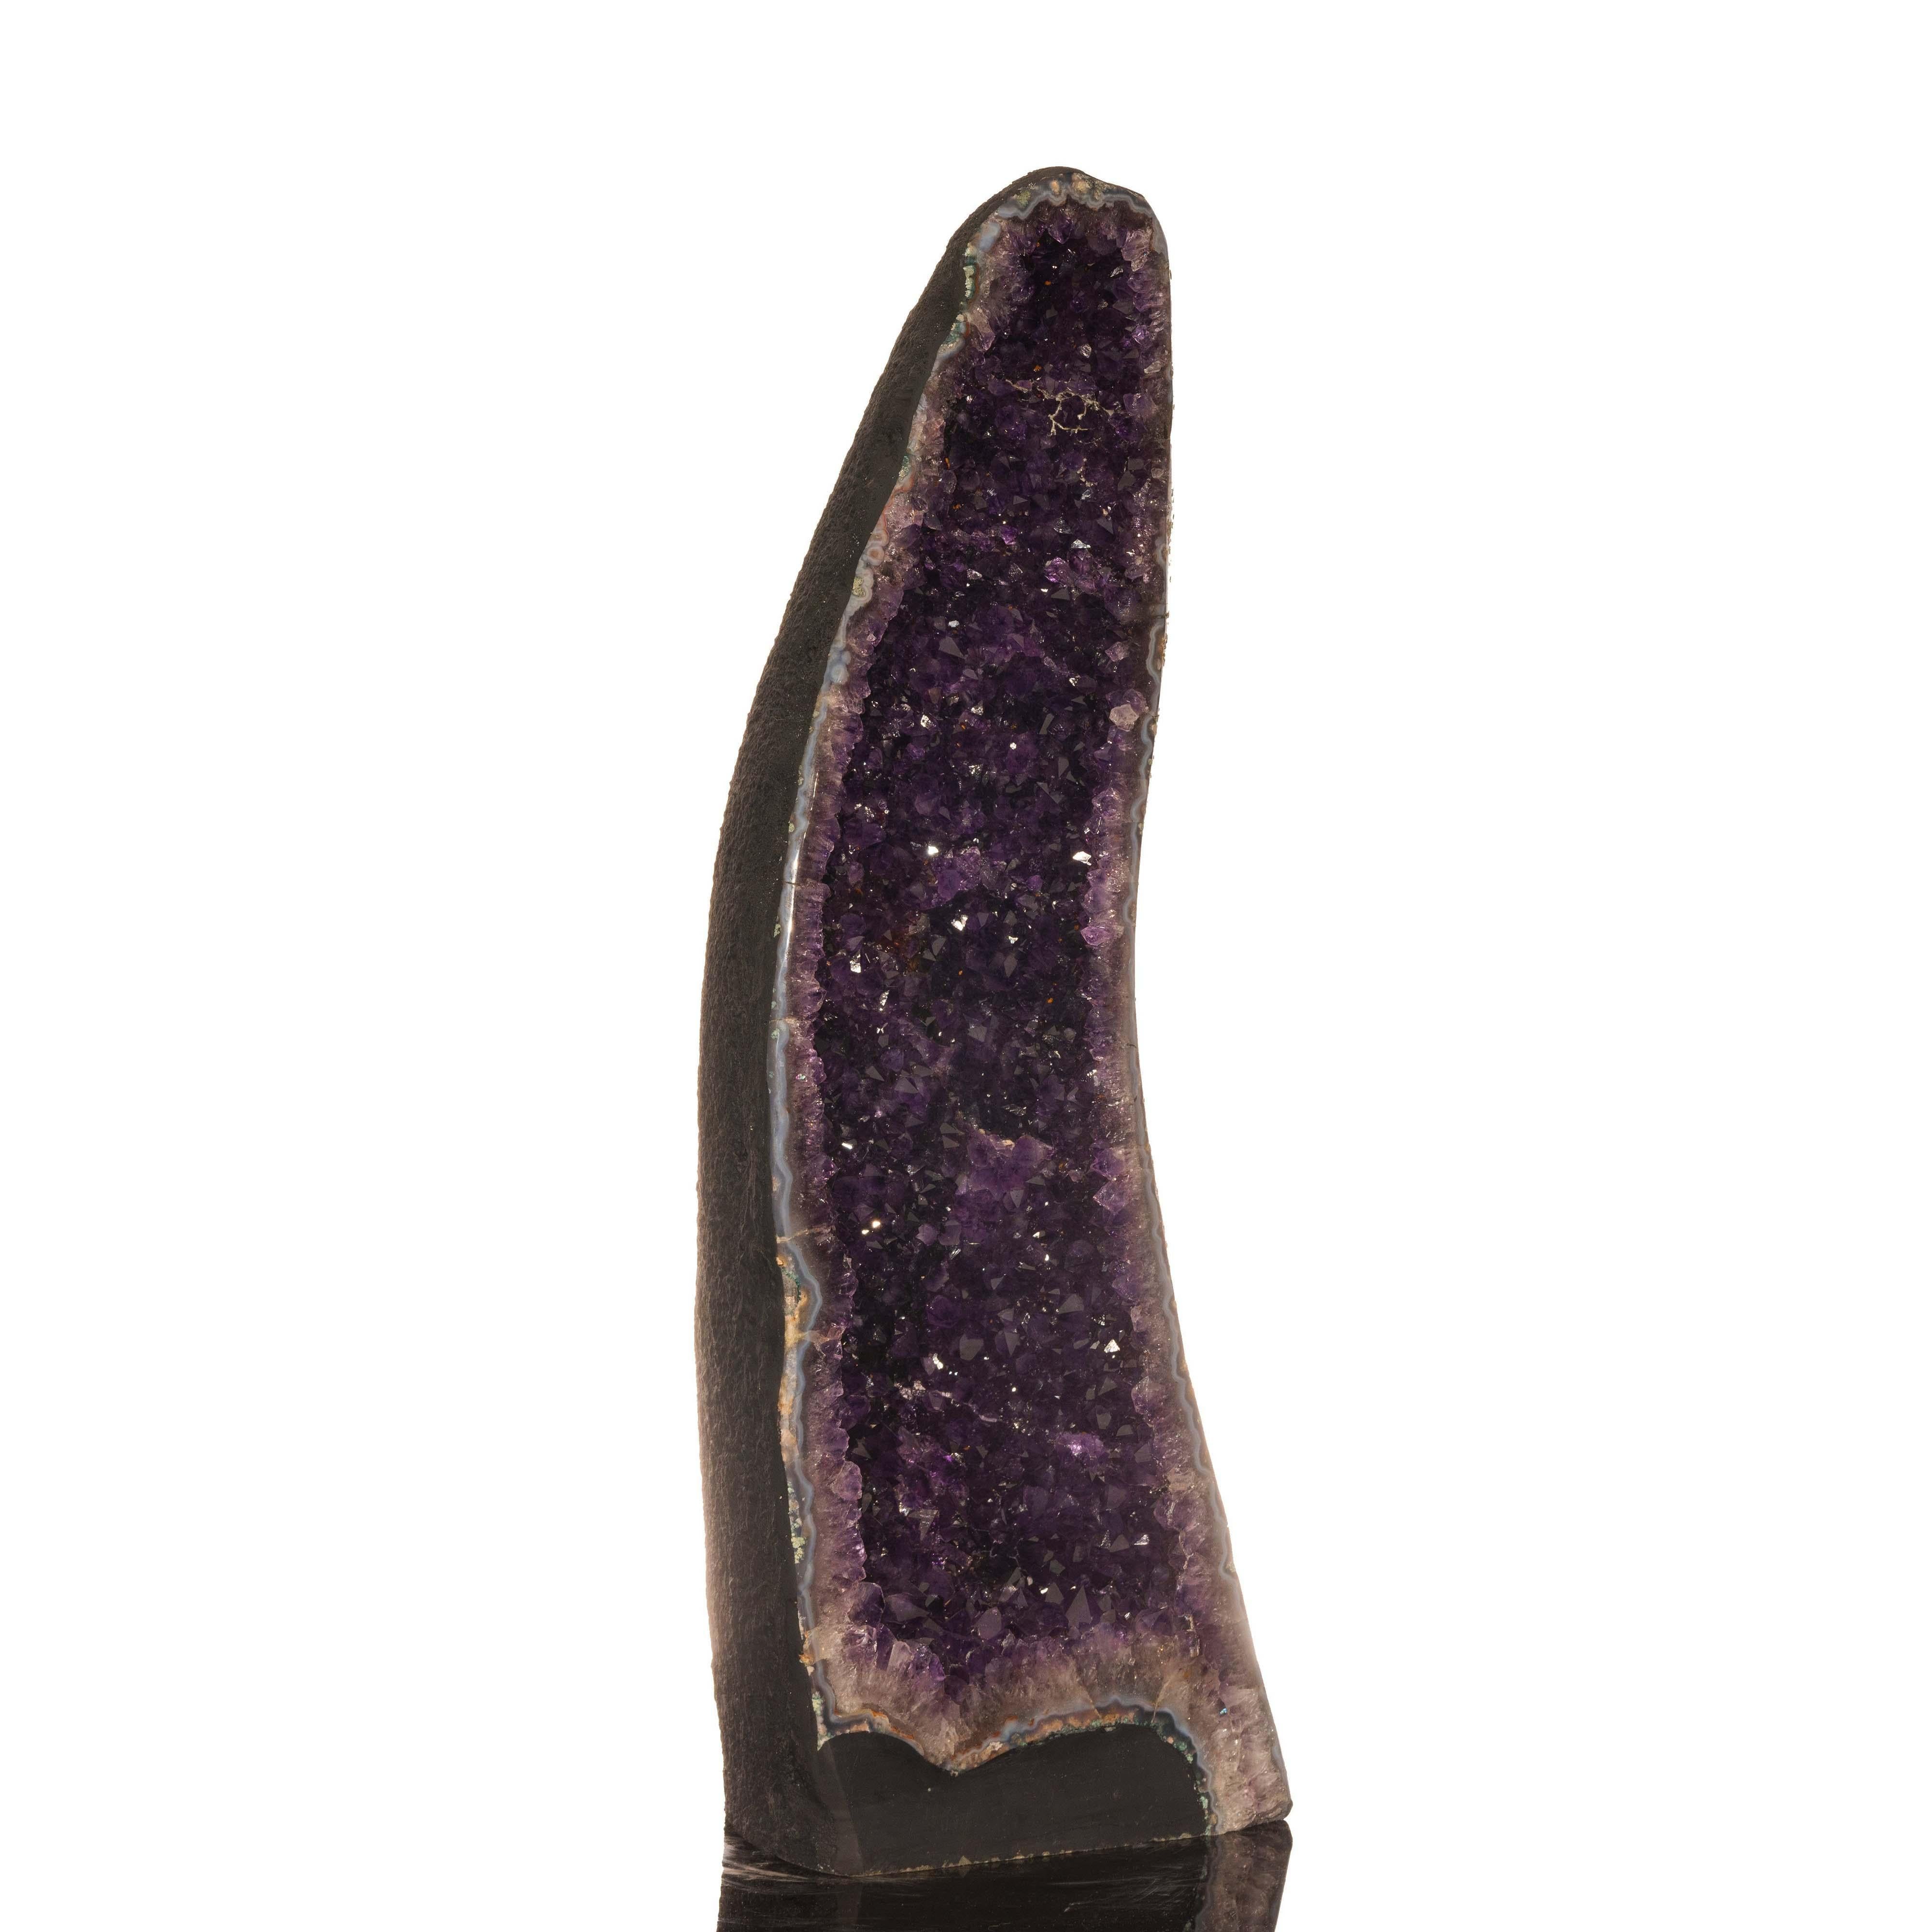 This Brazilian home decor piece with serious presence boasts a glimmering plethora of purple-drenched amethyst crystals contained within a sinuous stabilized cathedral geode. A pale rim of blue agate banding accents the deep purple. This will make a